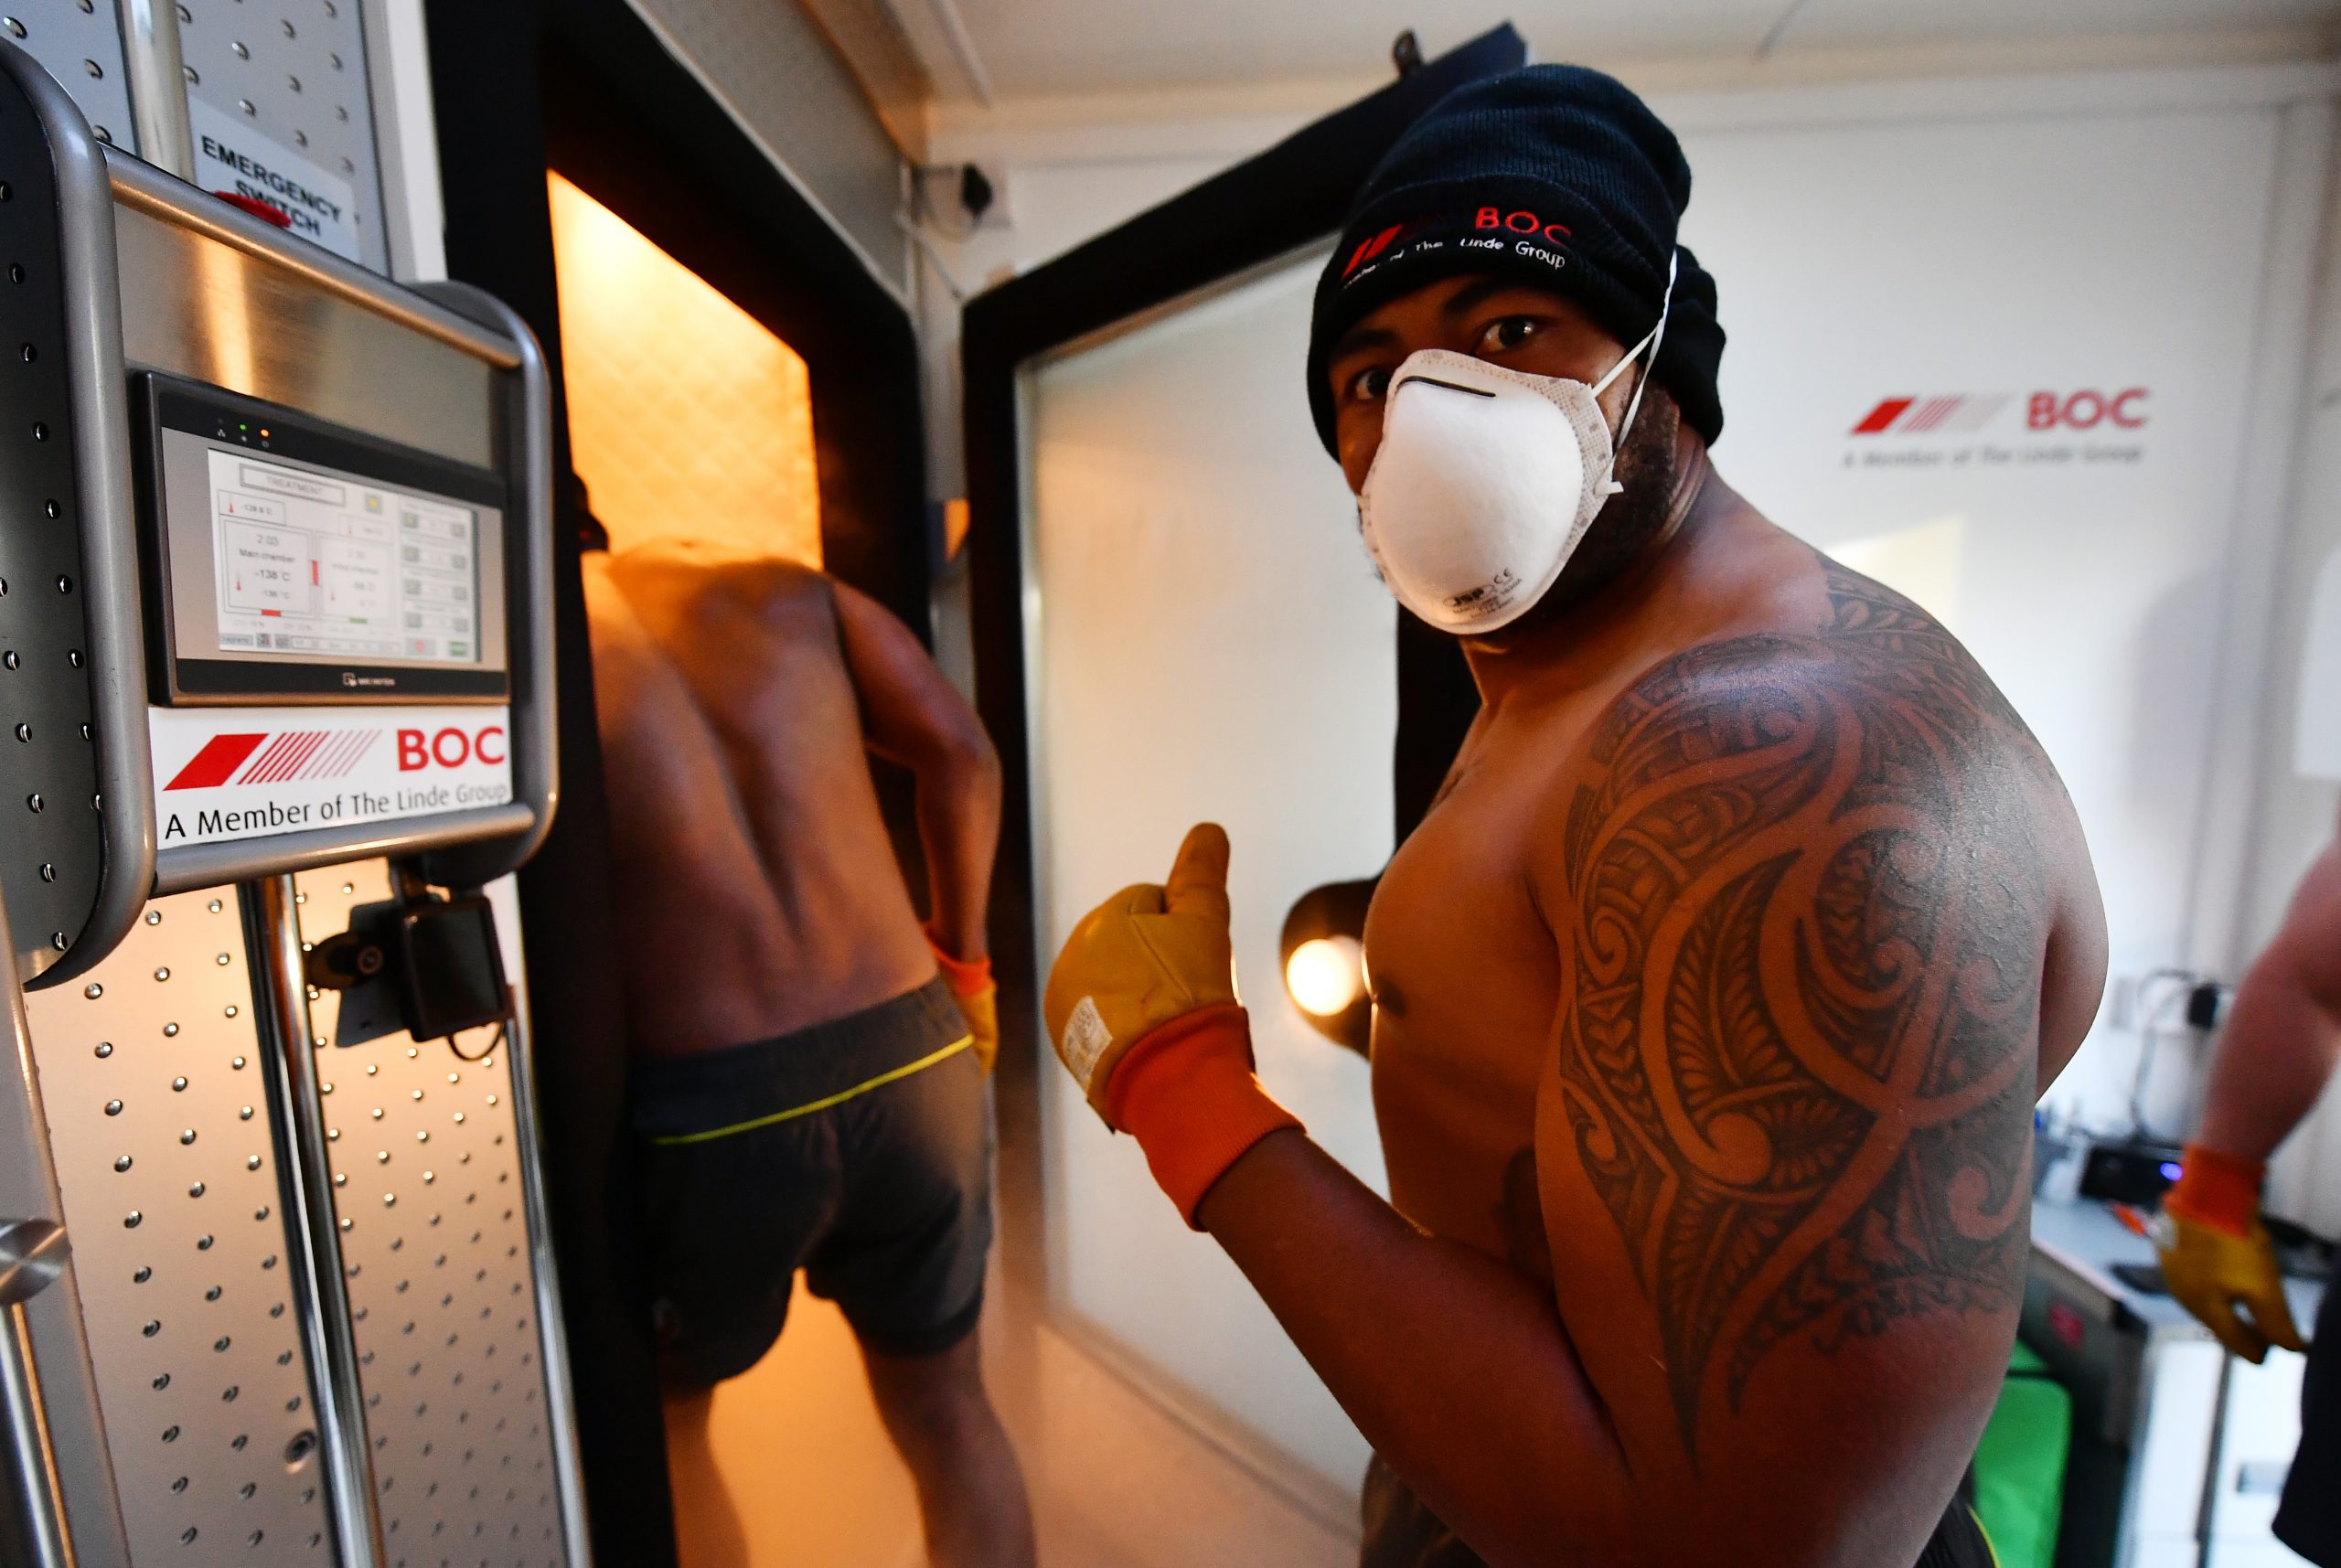 How does a cryochamber work and why are so many athletes using it?